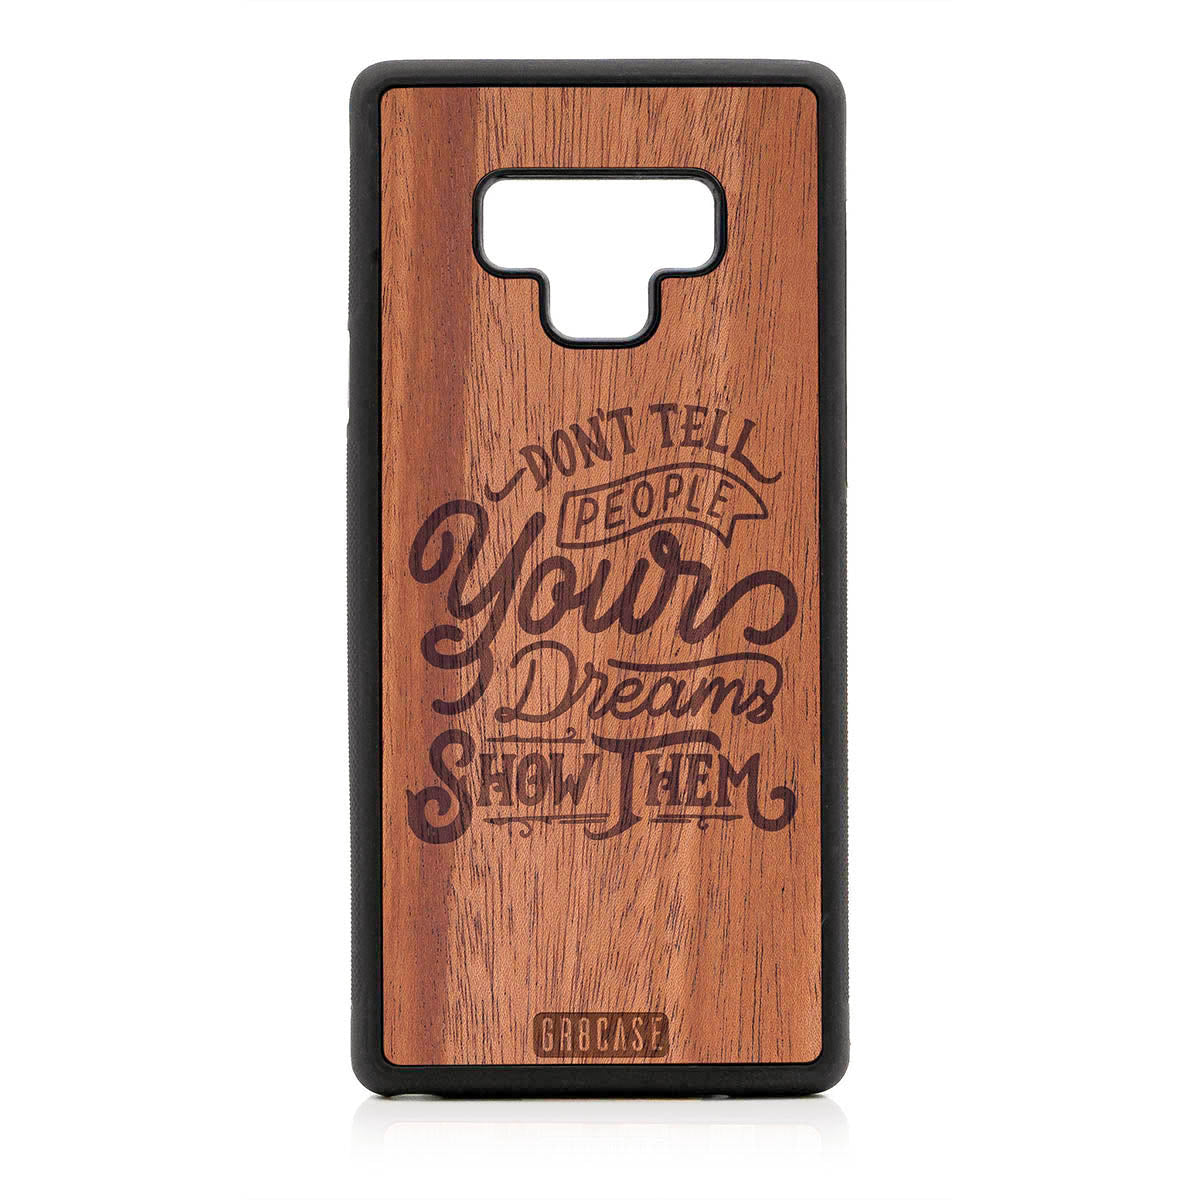 Don't Tell People Your Dreams Show Them Design Wood Case For Samsung Galaxy Note 9 by GR8CASE